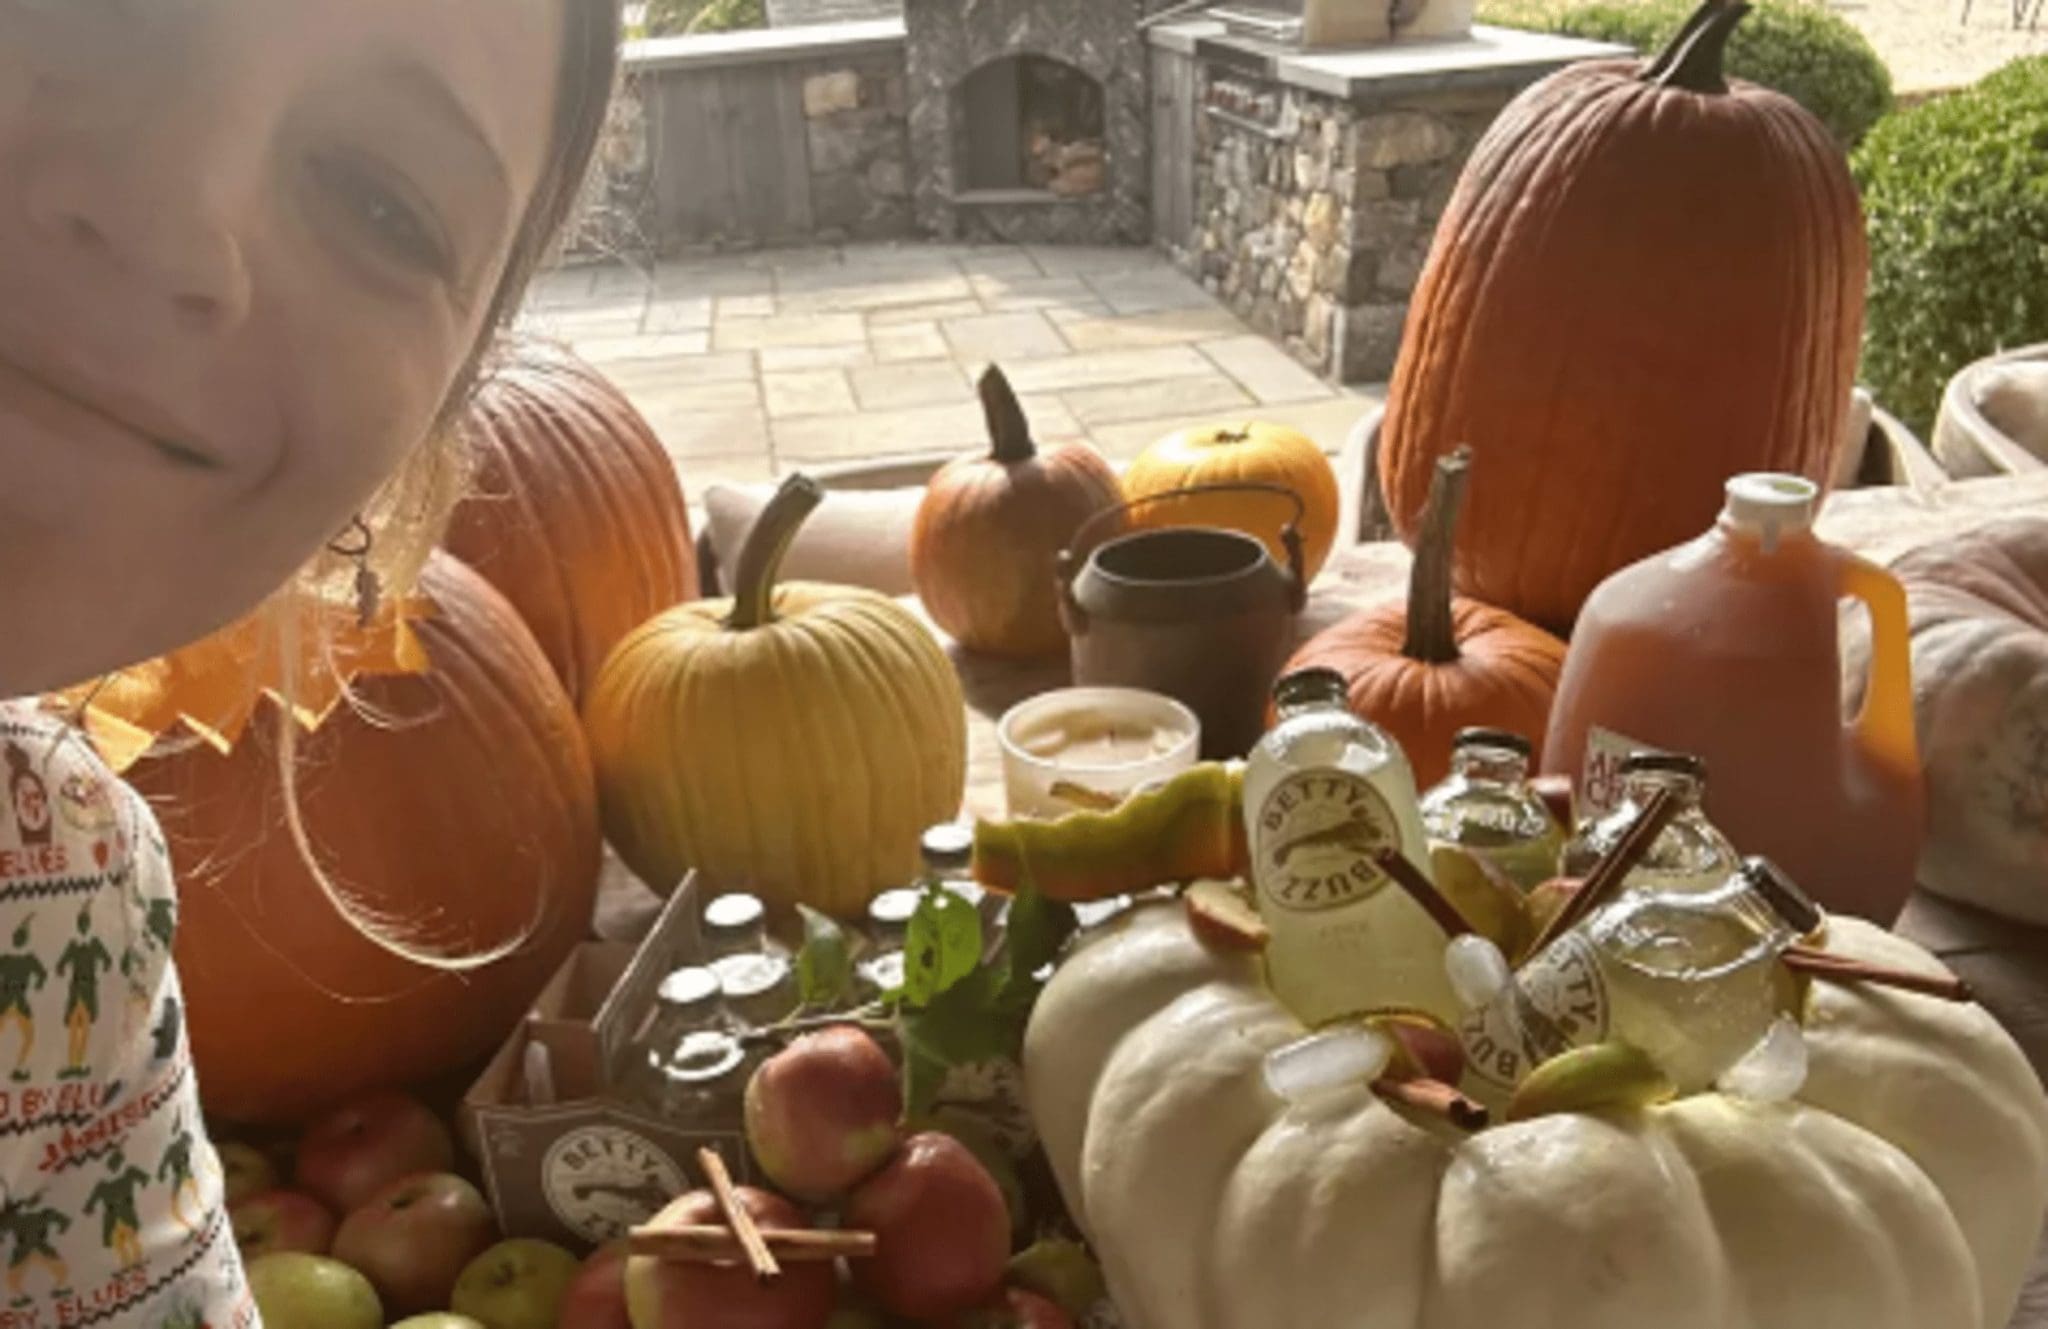 Blake Lively Showed Off Her Elaborate Autumn Décor, Complete With Bread In The Shape Of A Pumpkin